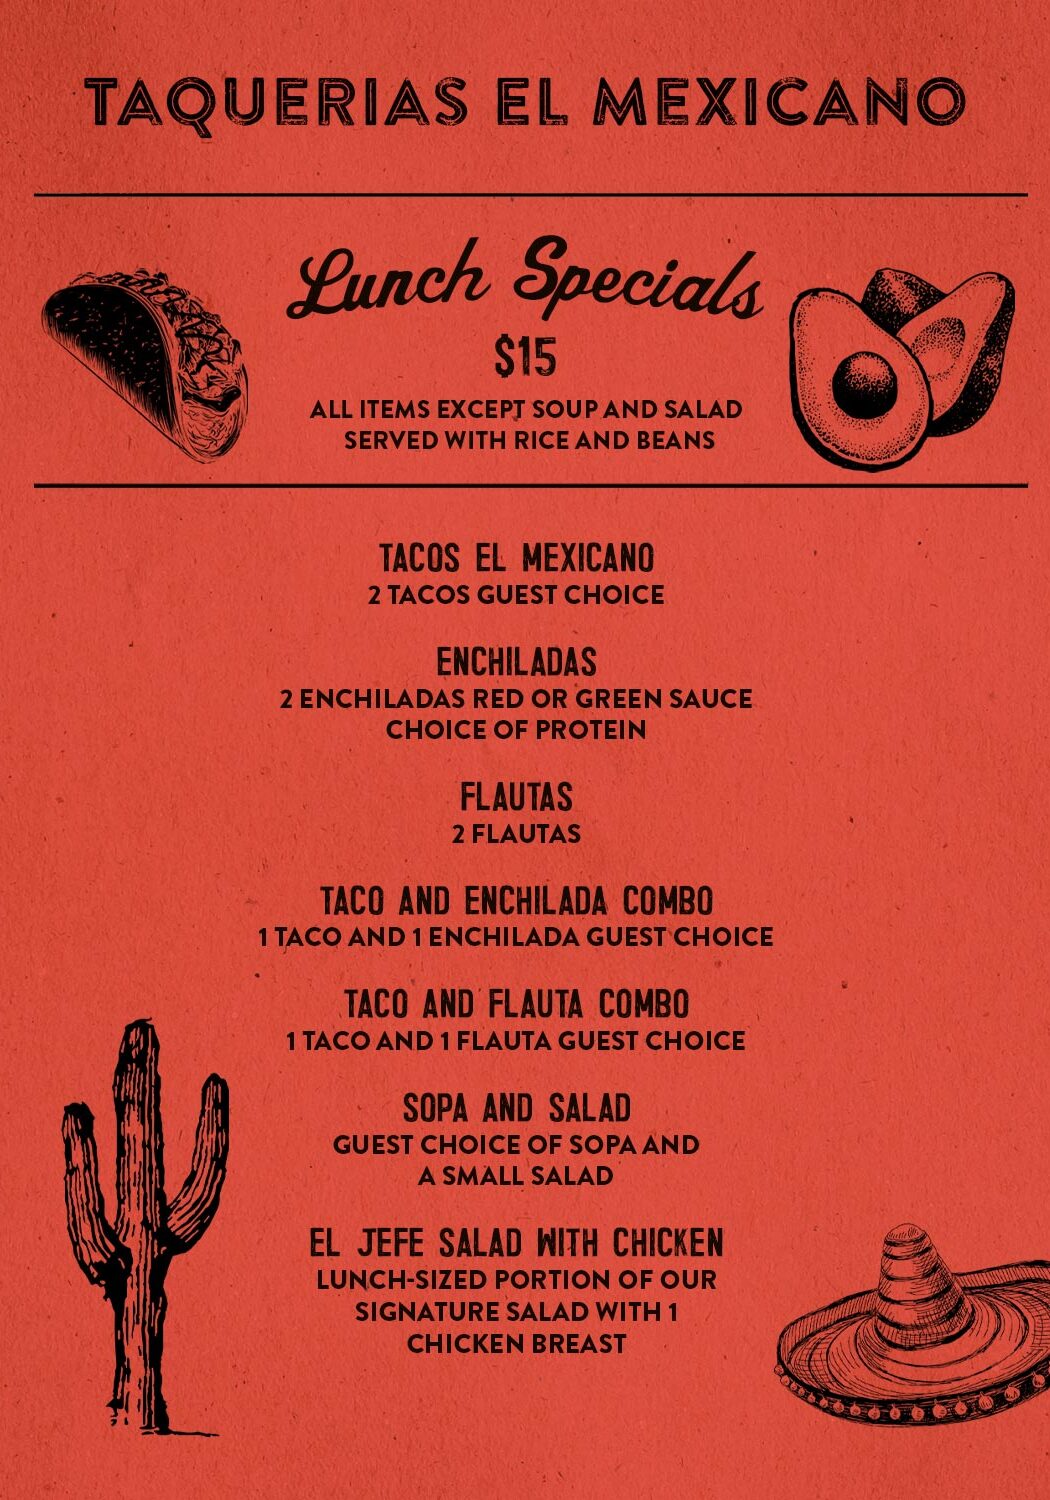 All of the delicious Mexican Food at Taquerias el Mexicano for lunch special